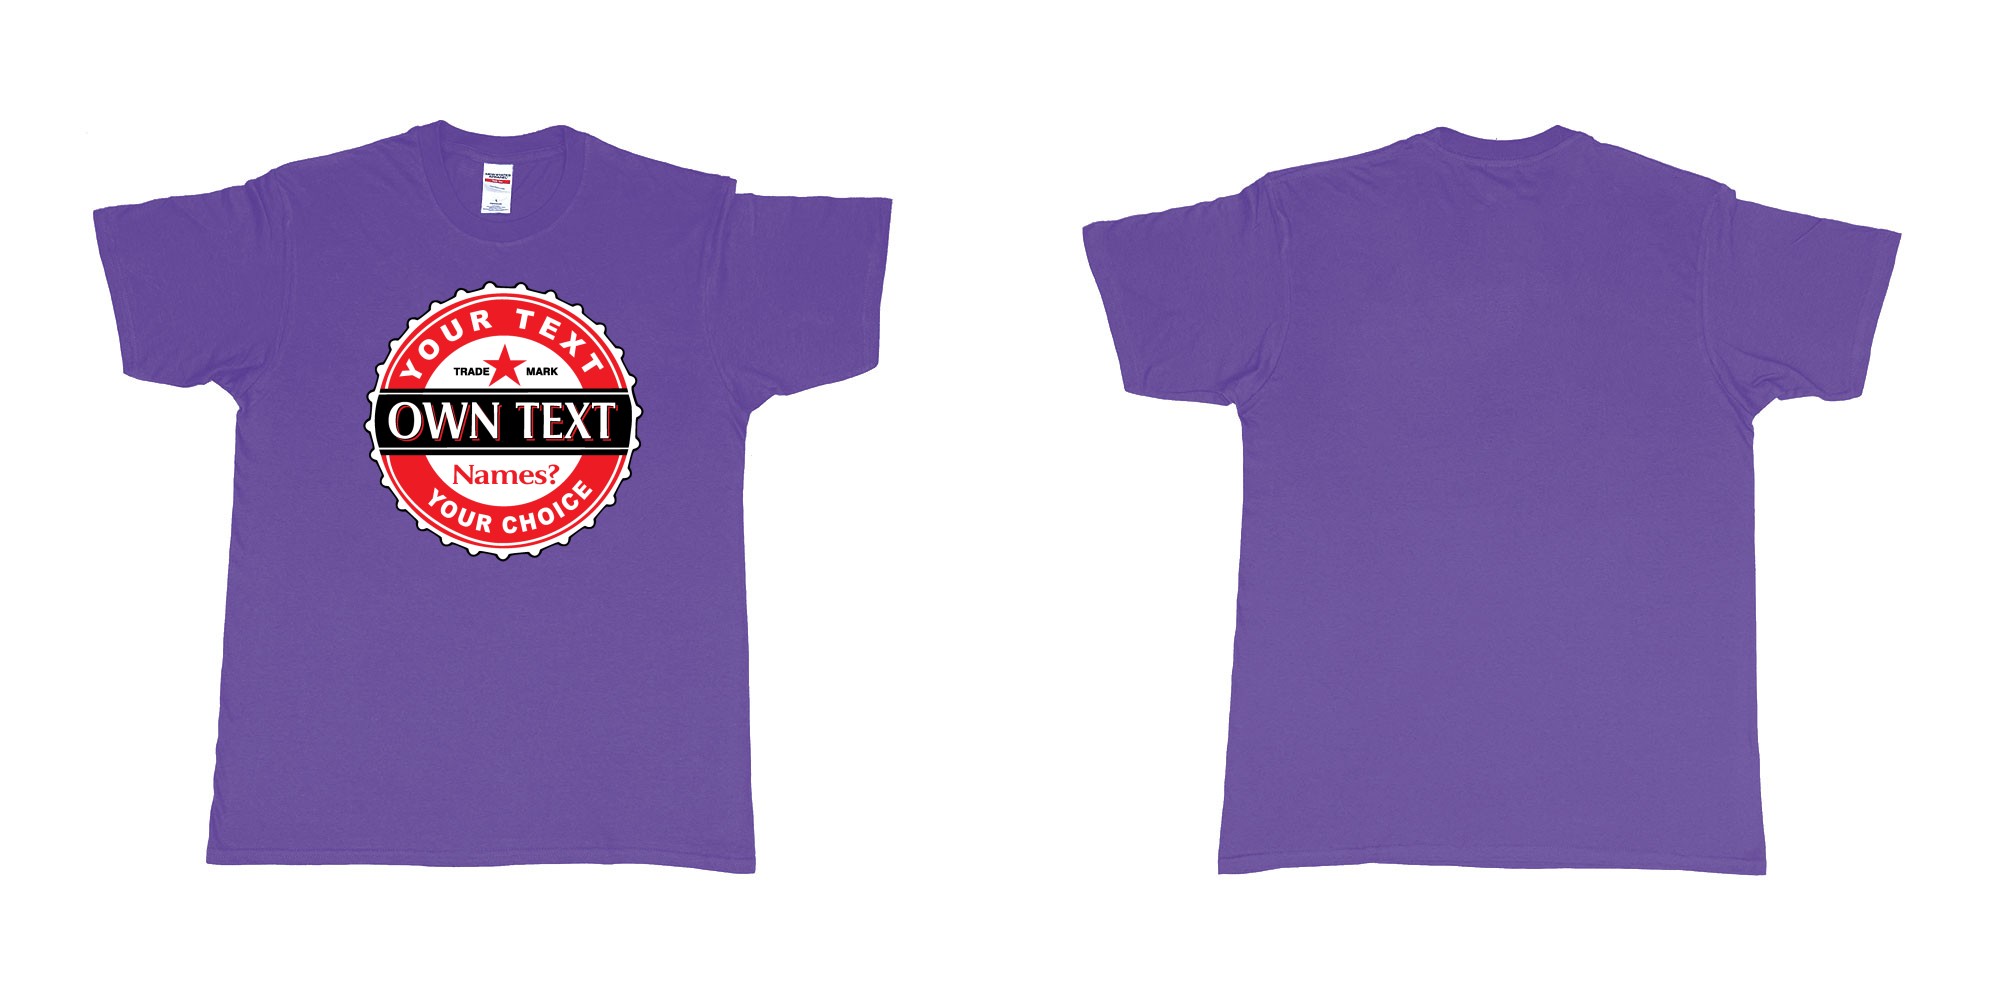 Custom tshirt design bintang classic strait in fabric color purple choice your own text made in Bali by The Pirate Way